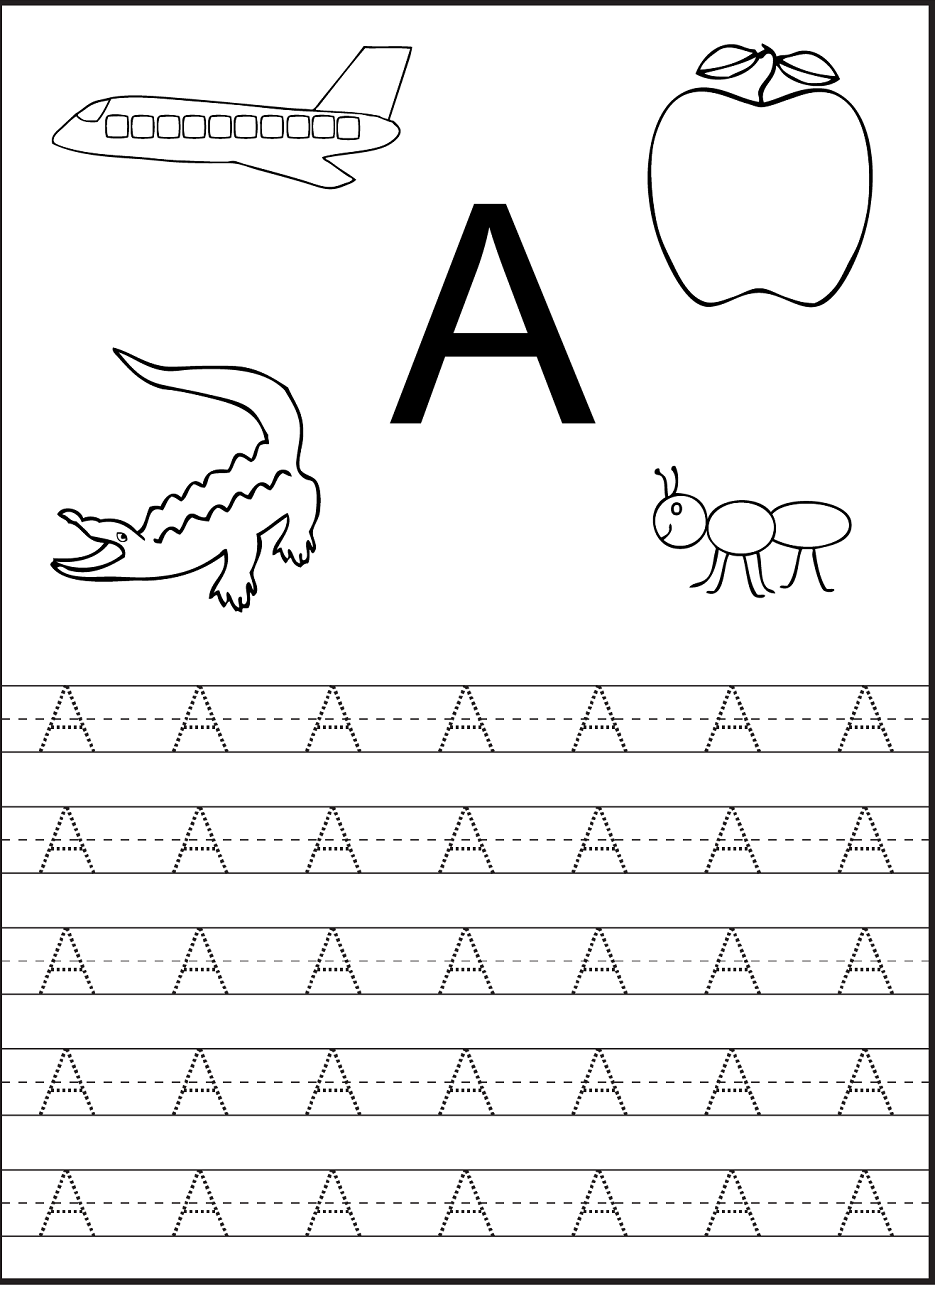 Tracing The Letter A Free Printable Activity Shelter Tracing Worksheets Preschool Free Preschool Worksheets Tracing Worksheets